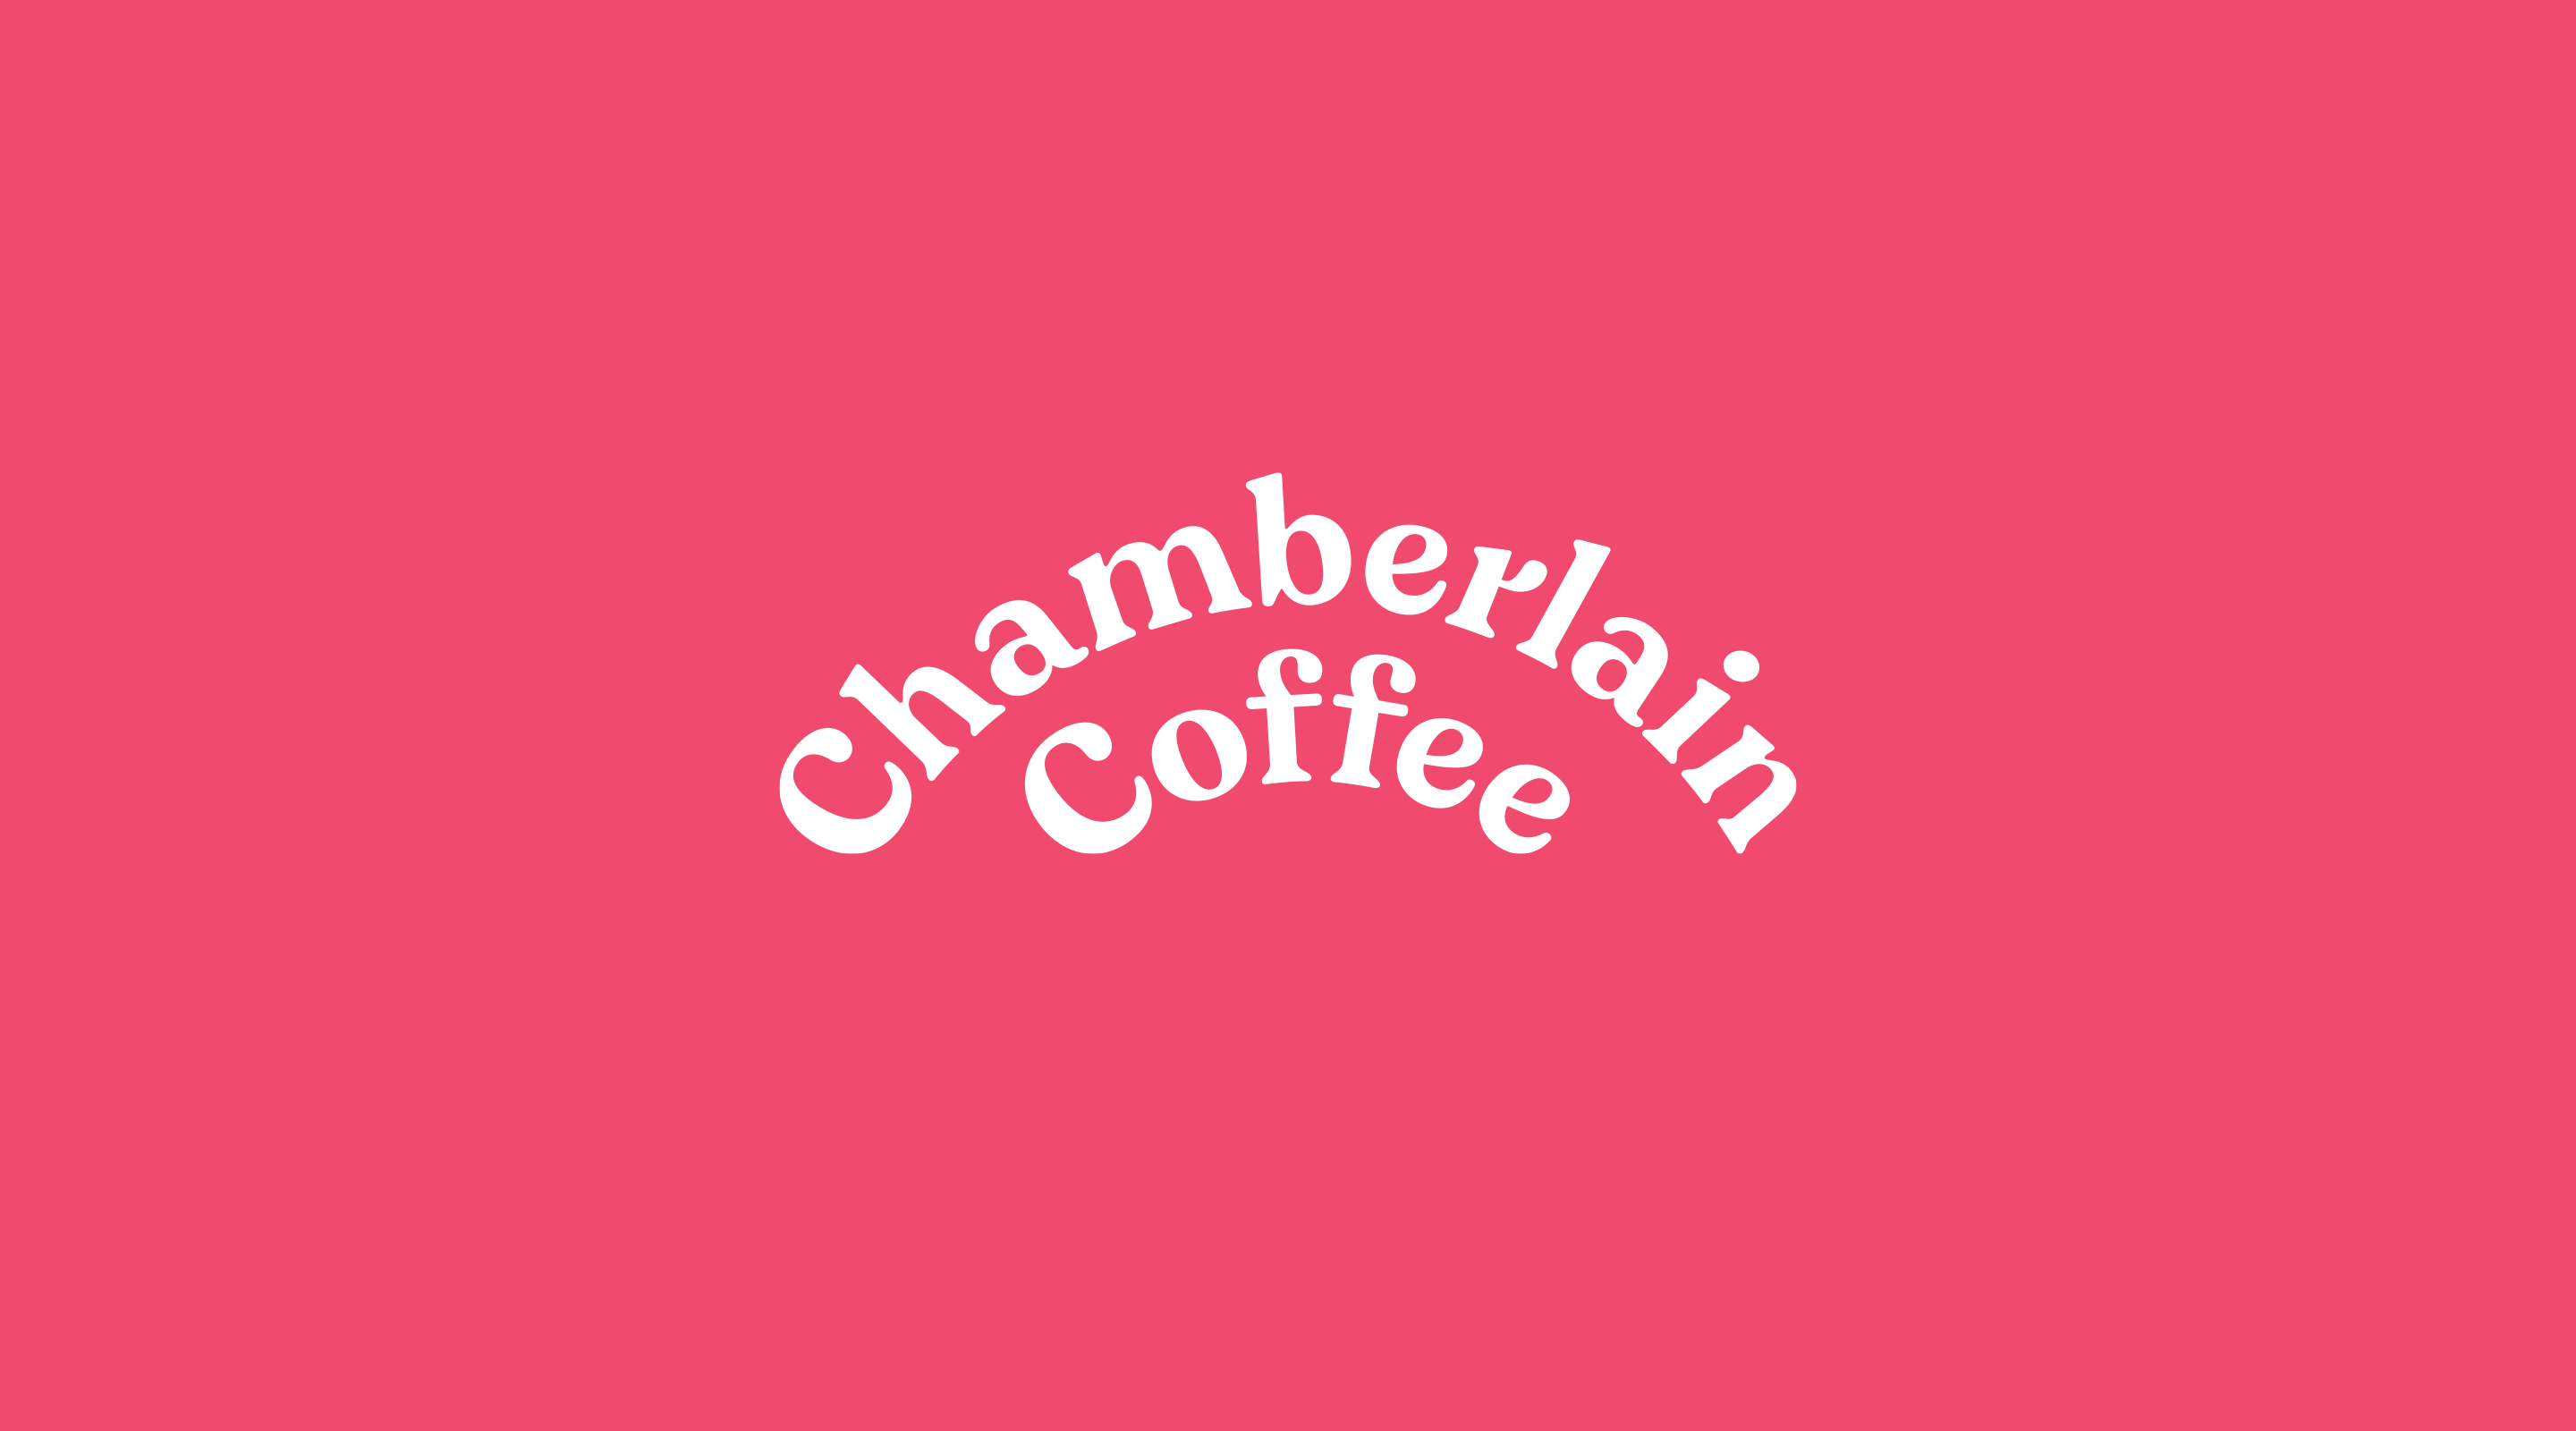 Chamberlain Coffee: The Innovation of Cold Brew